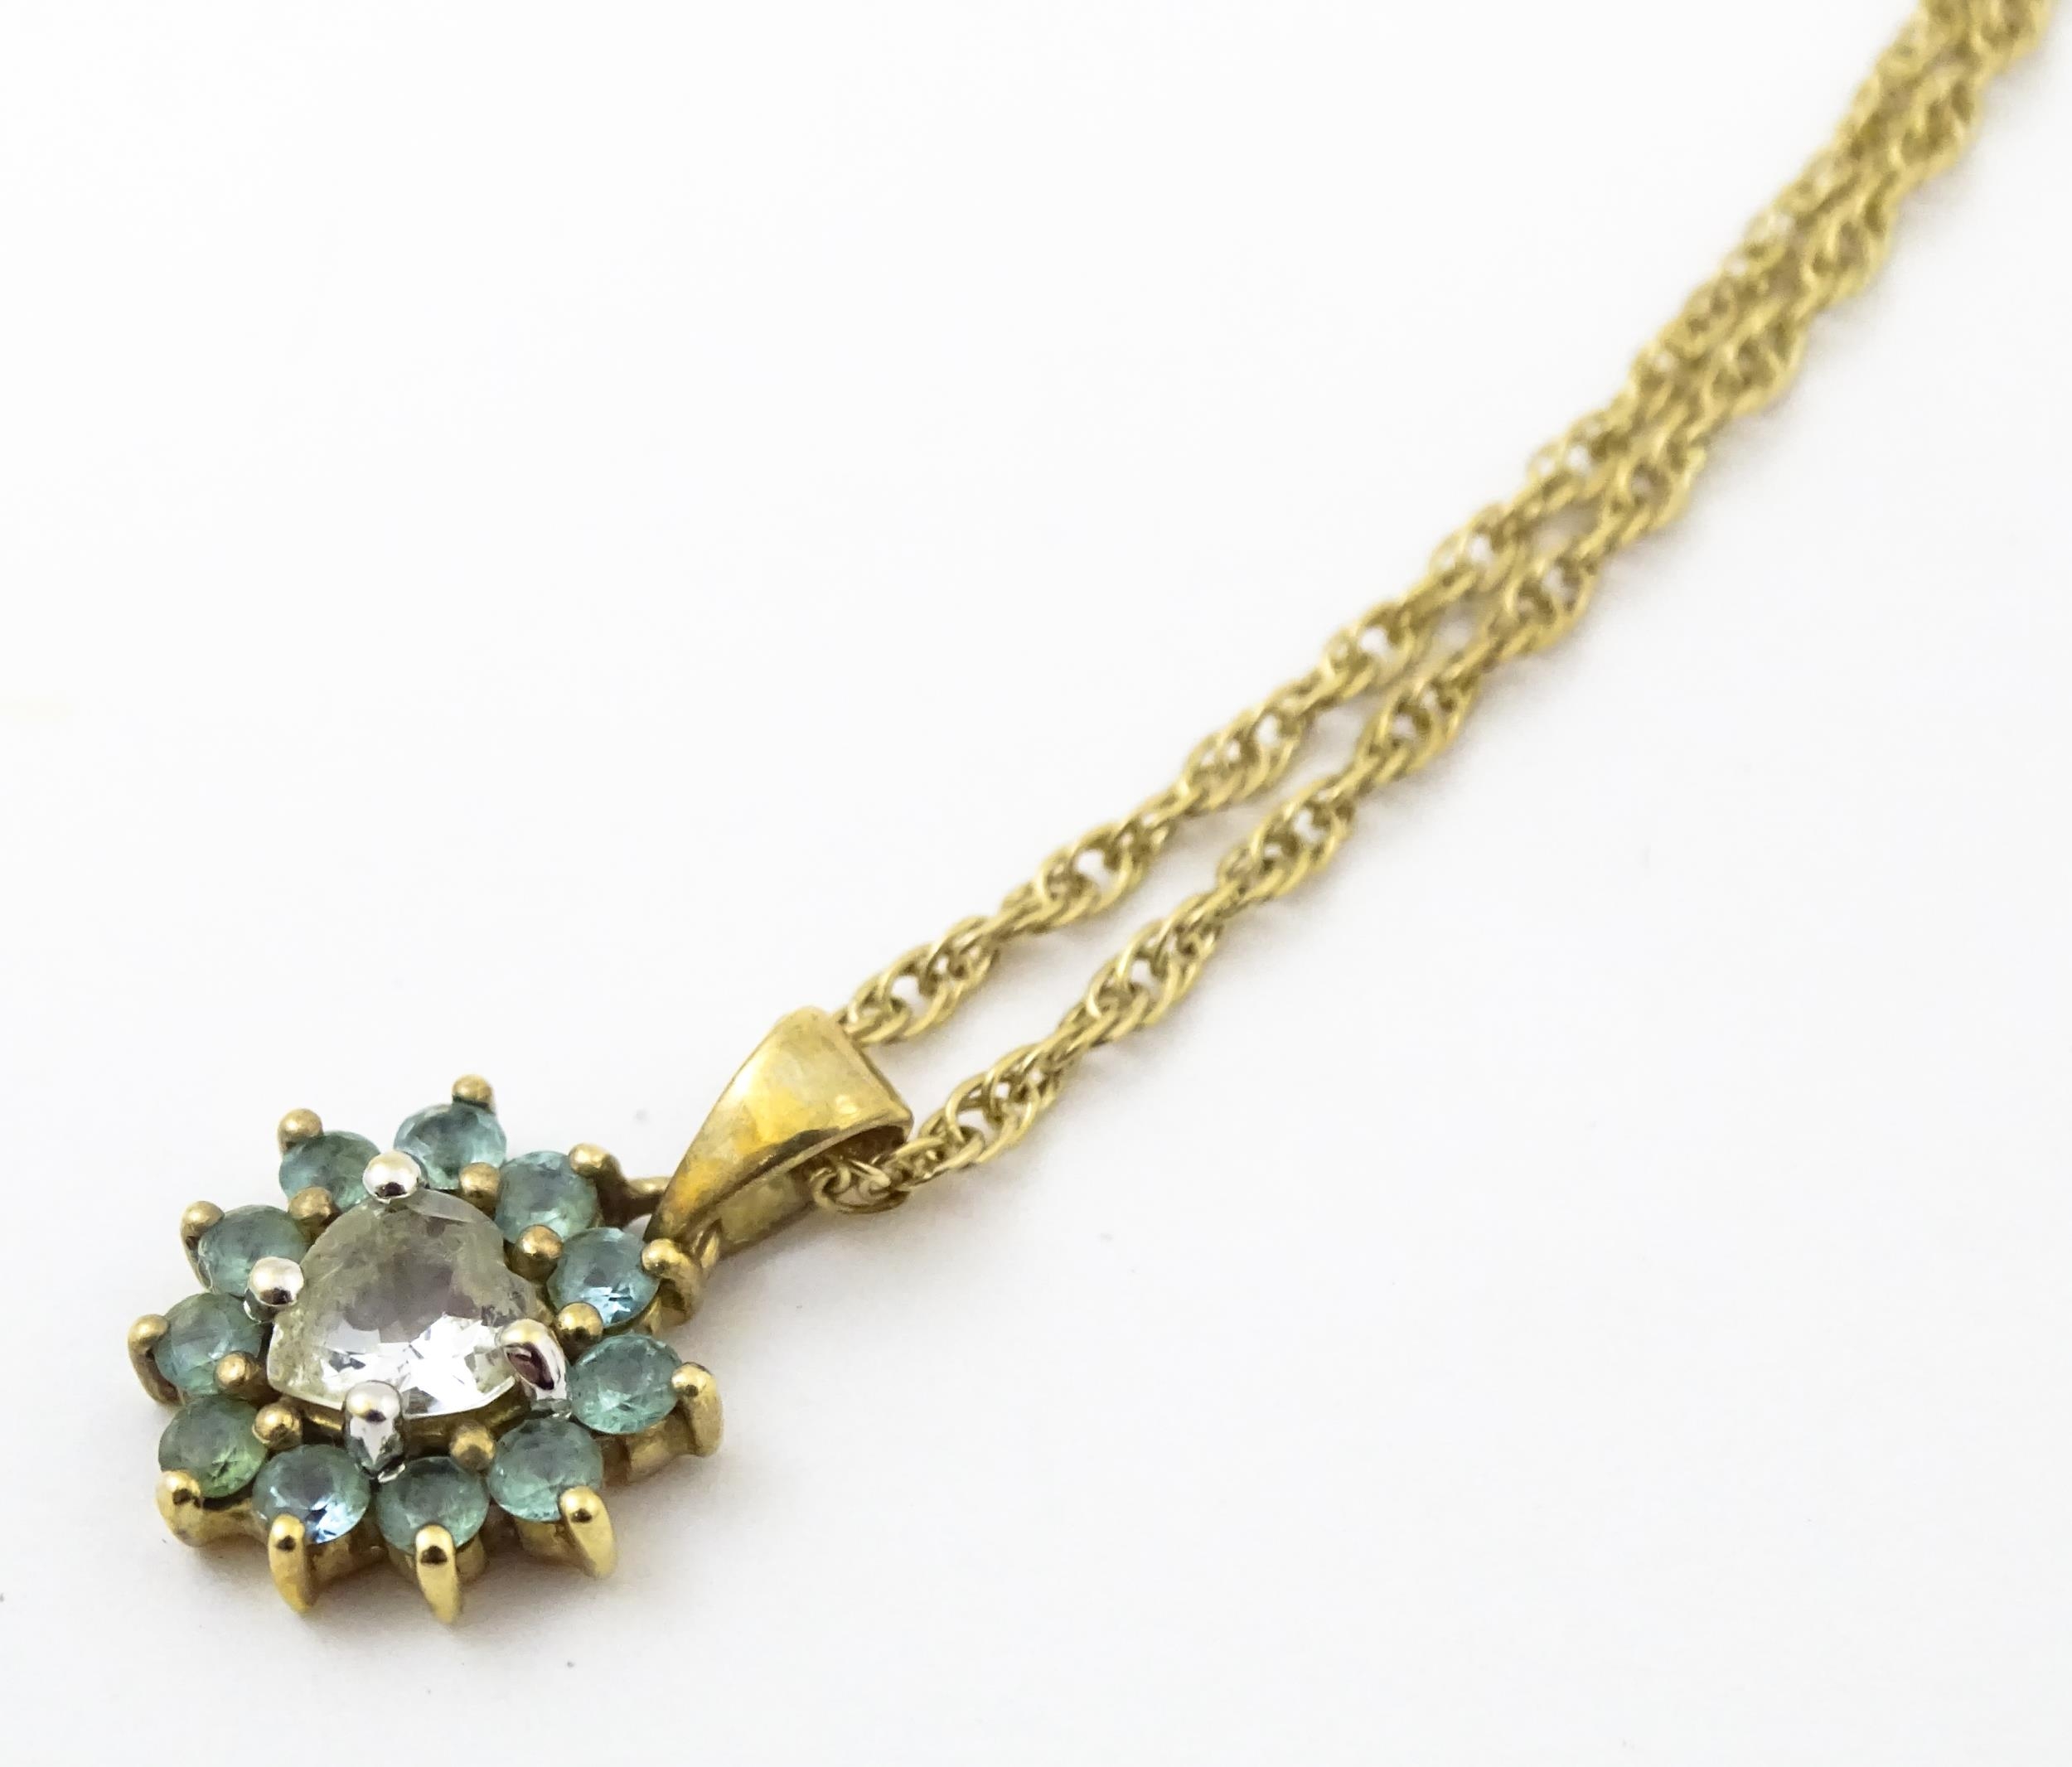 9ct gold pendant set with white and aqua coloured stones, with chain necklace. The chain approx - Image 7 of 10